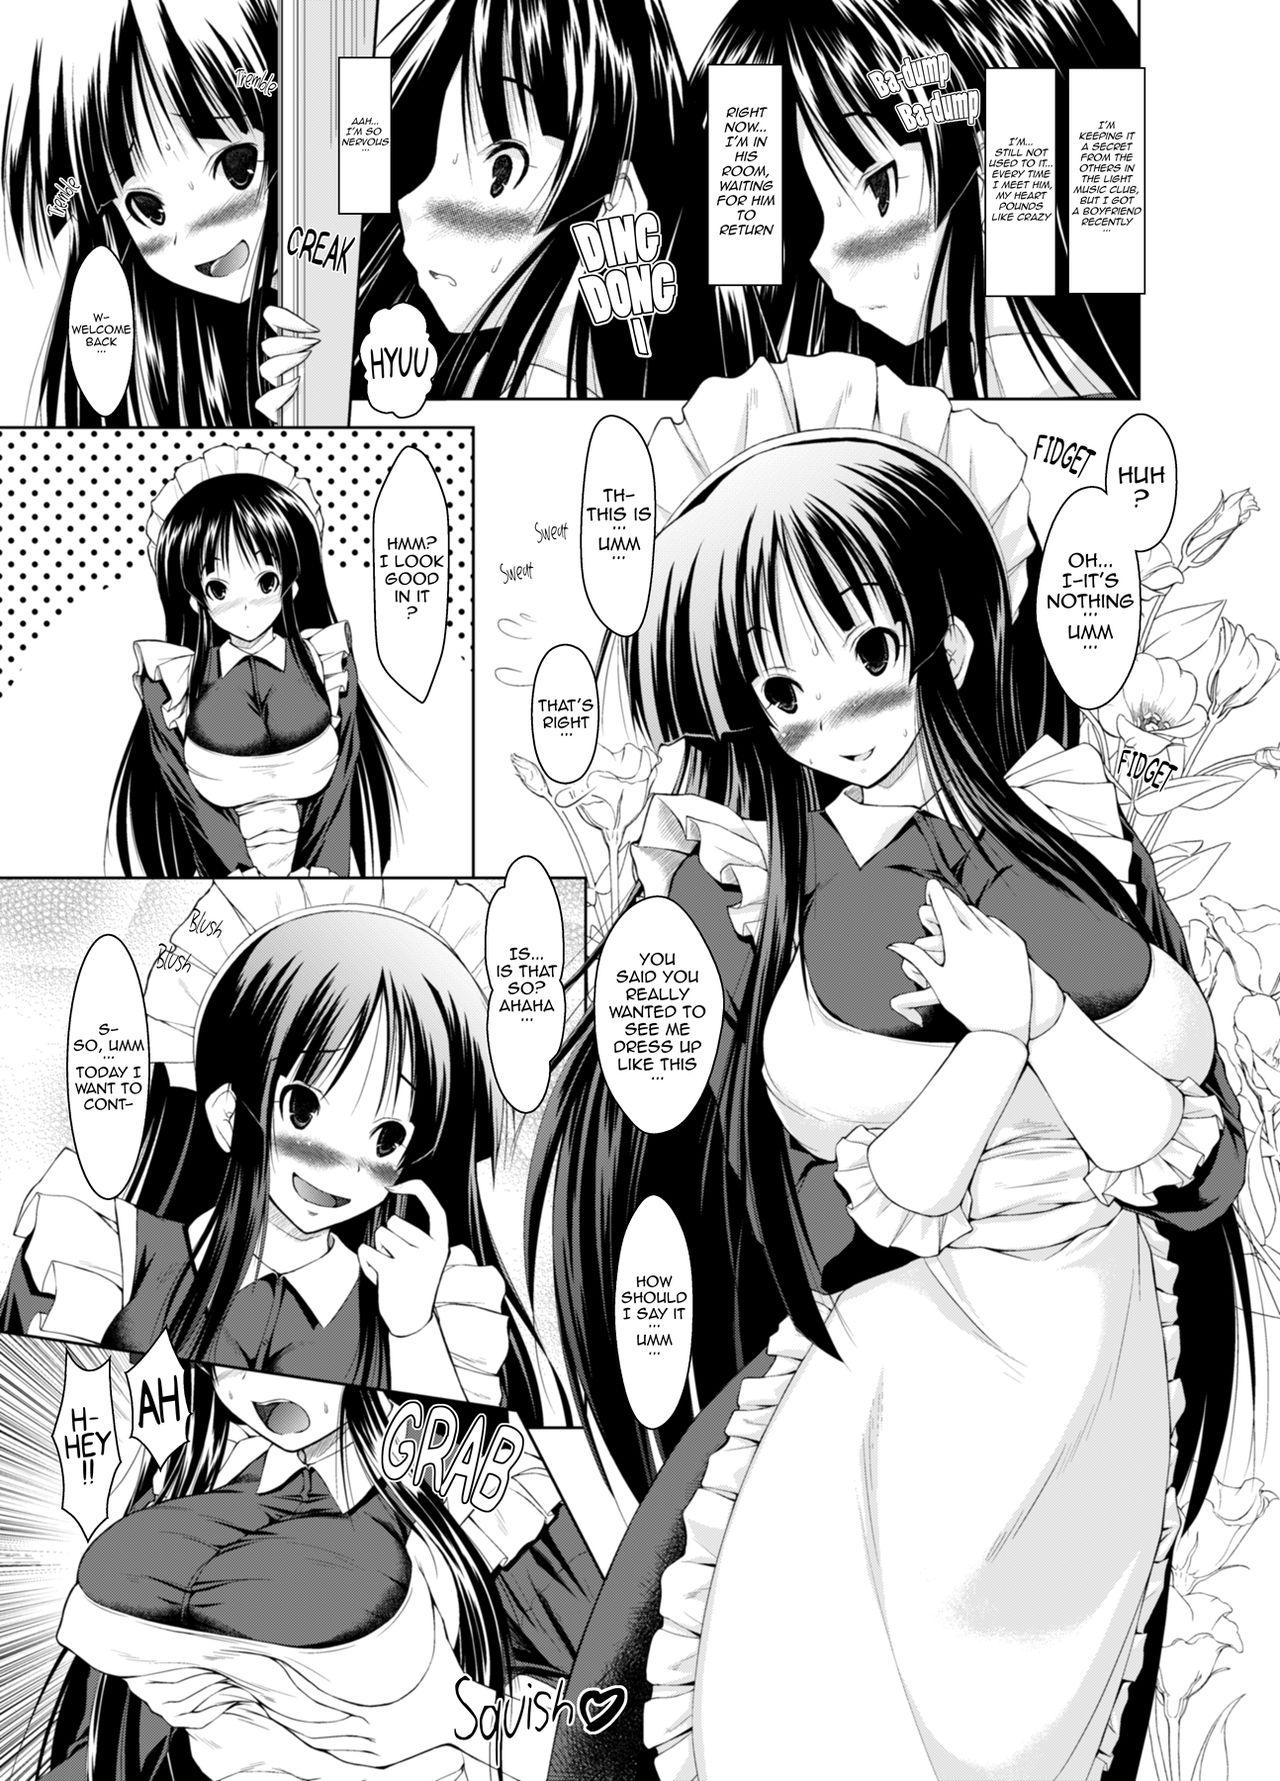 Transex Miocchi Maid. - K-on Coed - Page 5